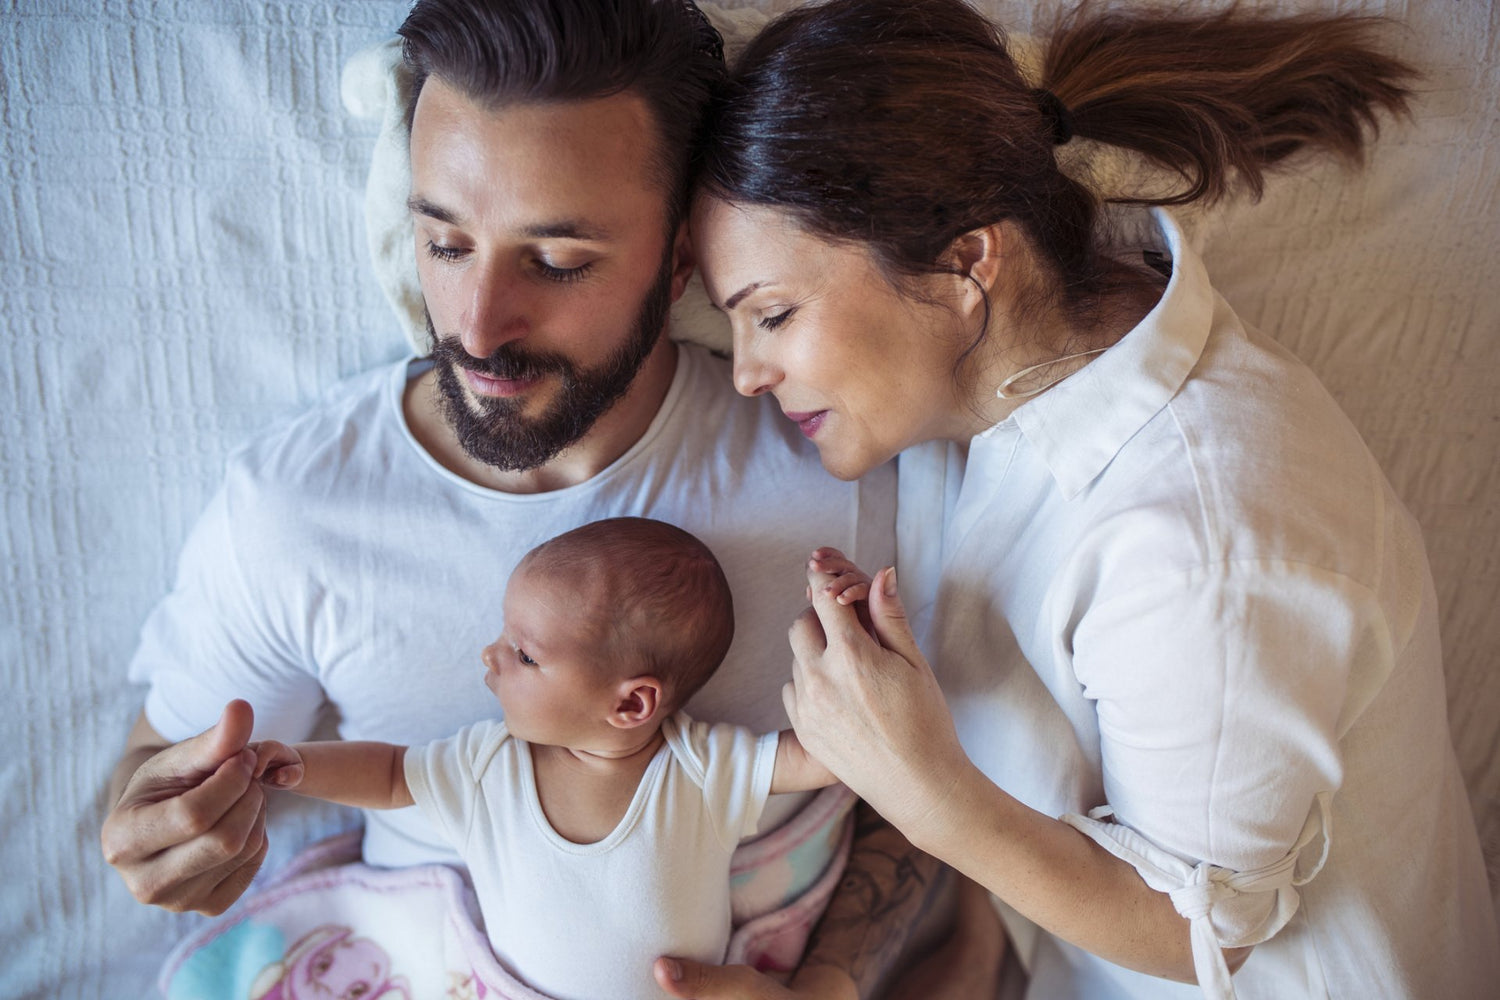 What You Need to Know About Heading Home with Your Newborn: An Interview with Dr. Jennifer Shu